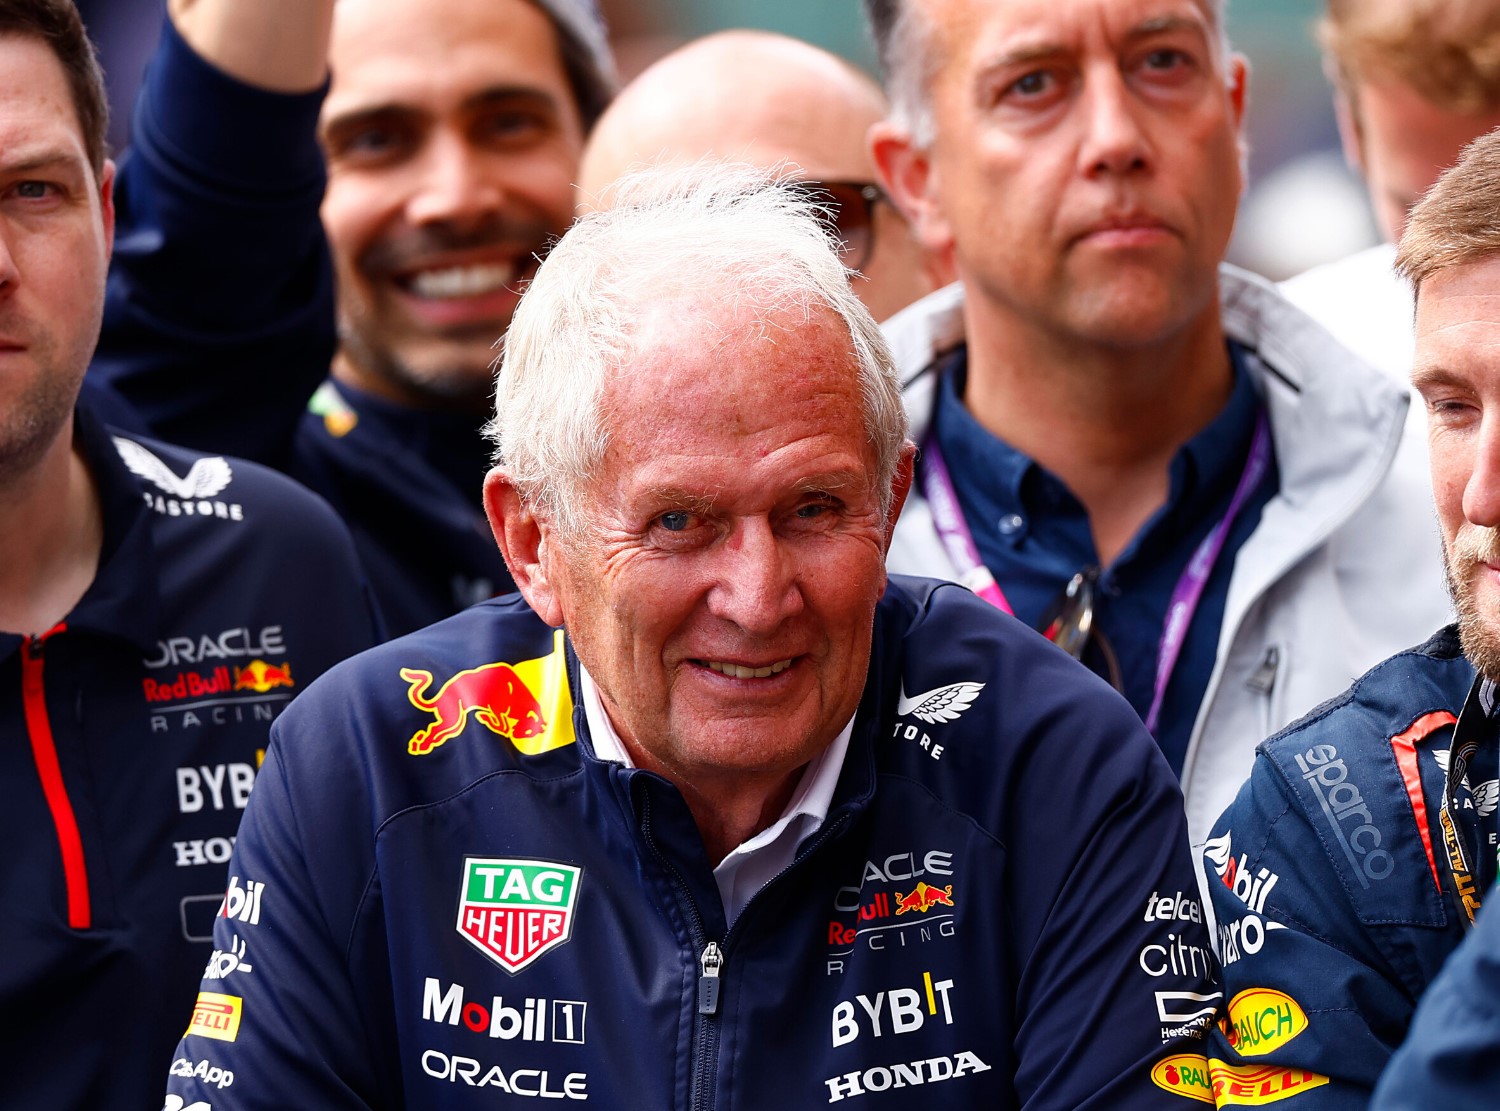 Red Bull Racing Team Consultant Dr Helmut Marko and the Red Bull Racing team look on at the podium celebrations during the F1 Grand Prix of Belgium at Circuit de Spa-Francorchamps on July 30, 2023 in Spa, Belgium. (Photo by Francois Nel/Getty Images) // Getty Images / Red Bull Content Pool